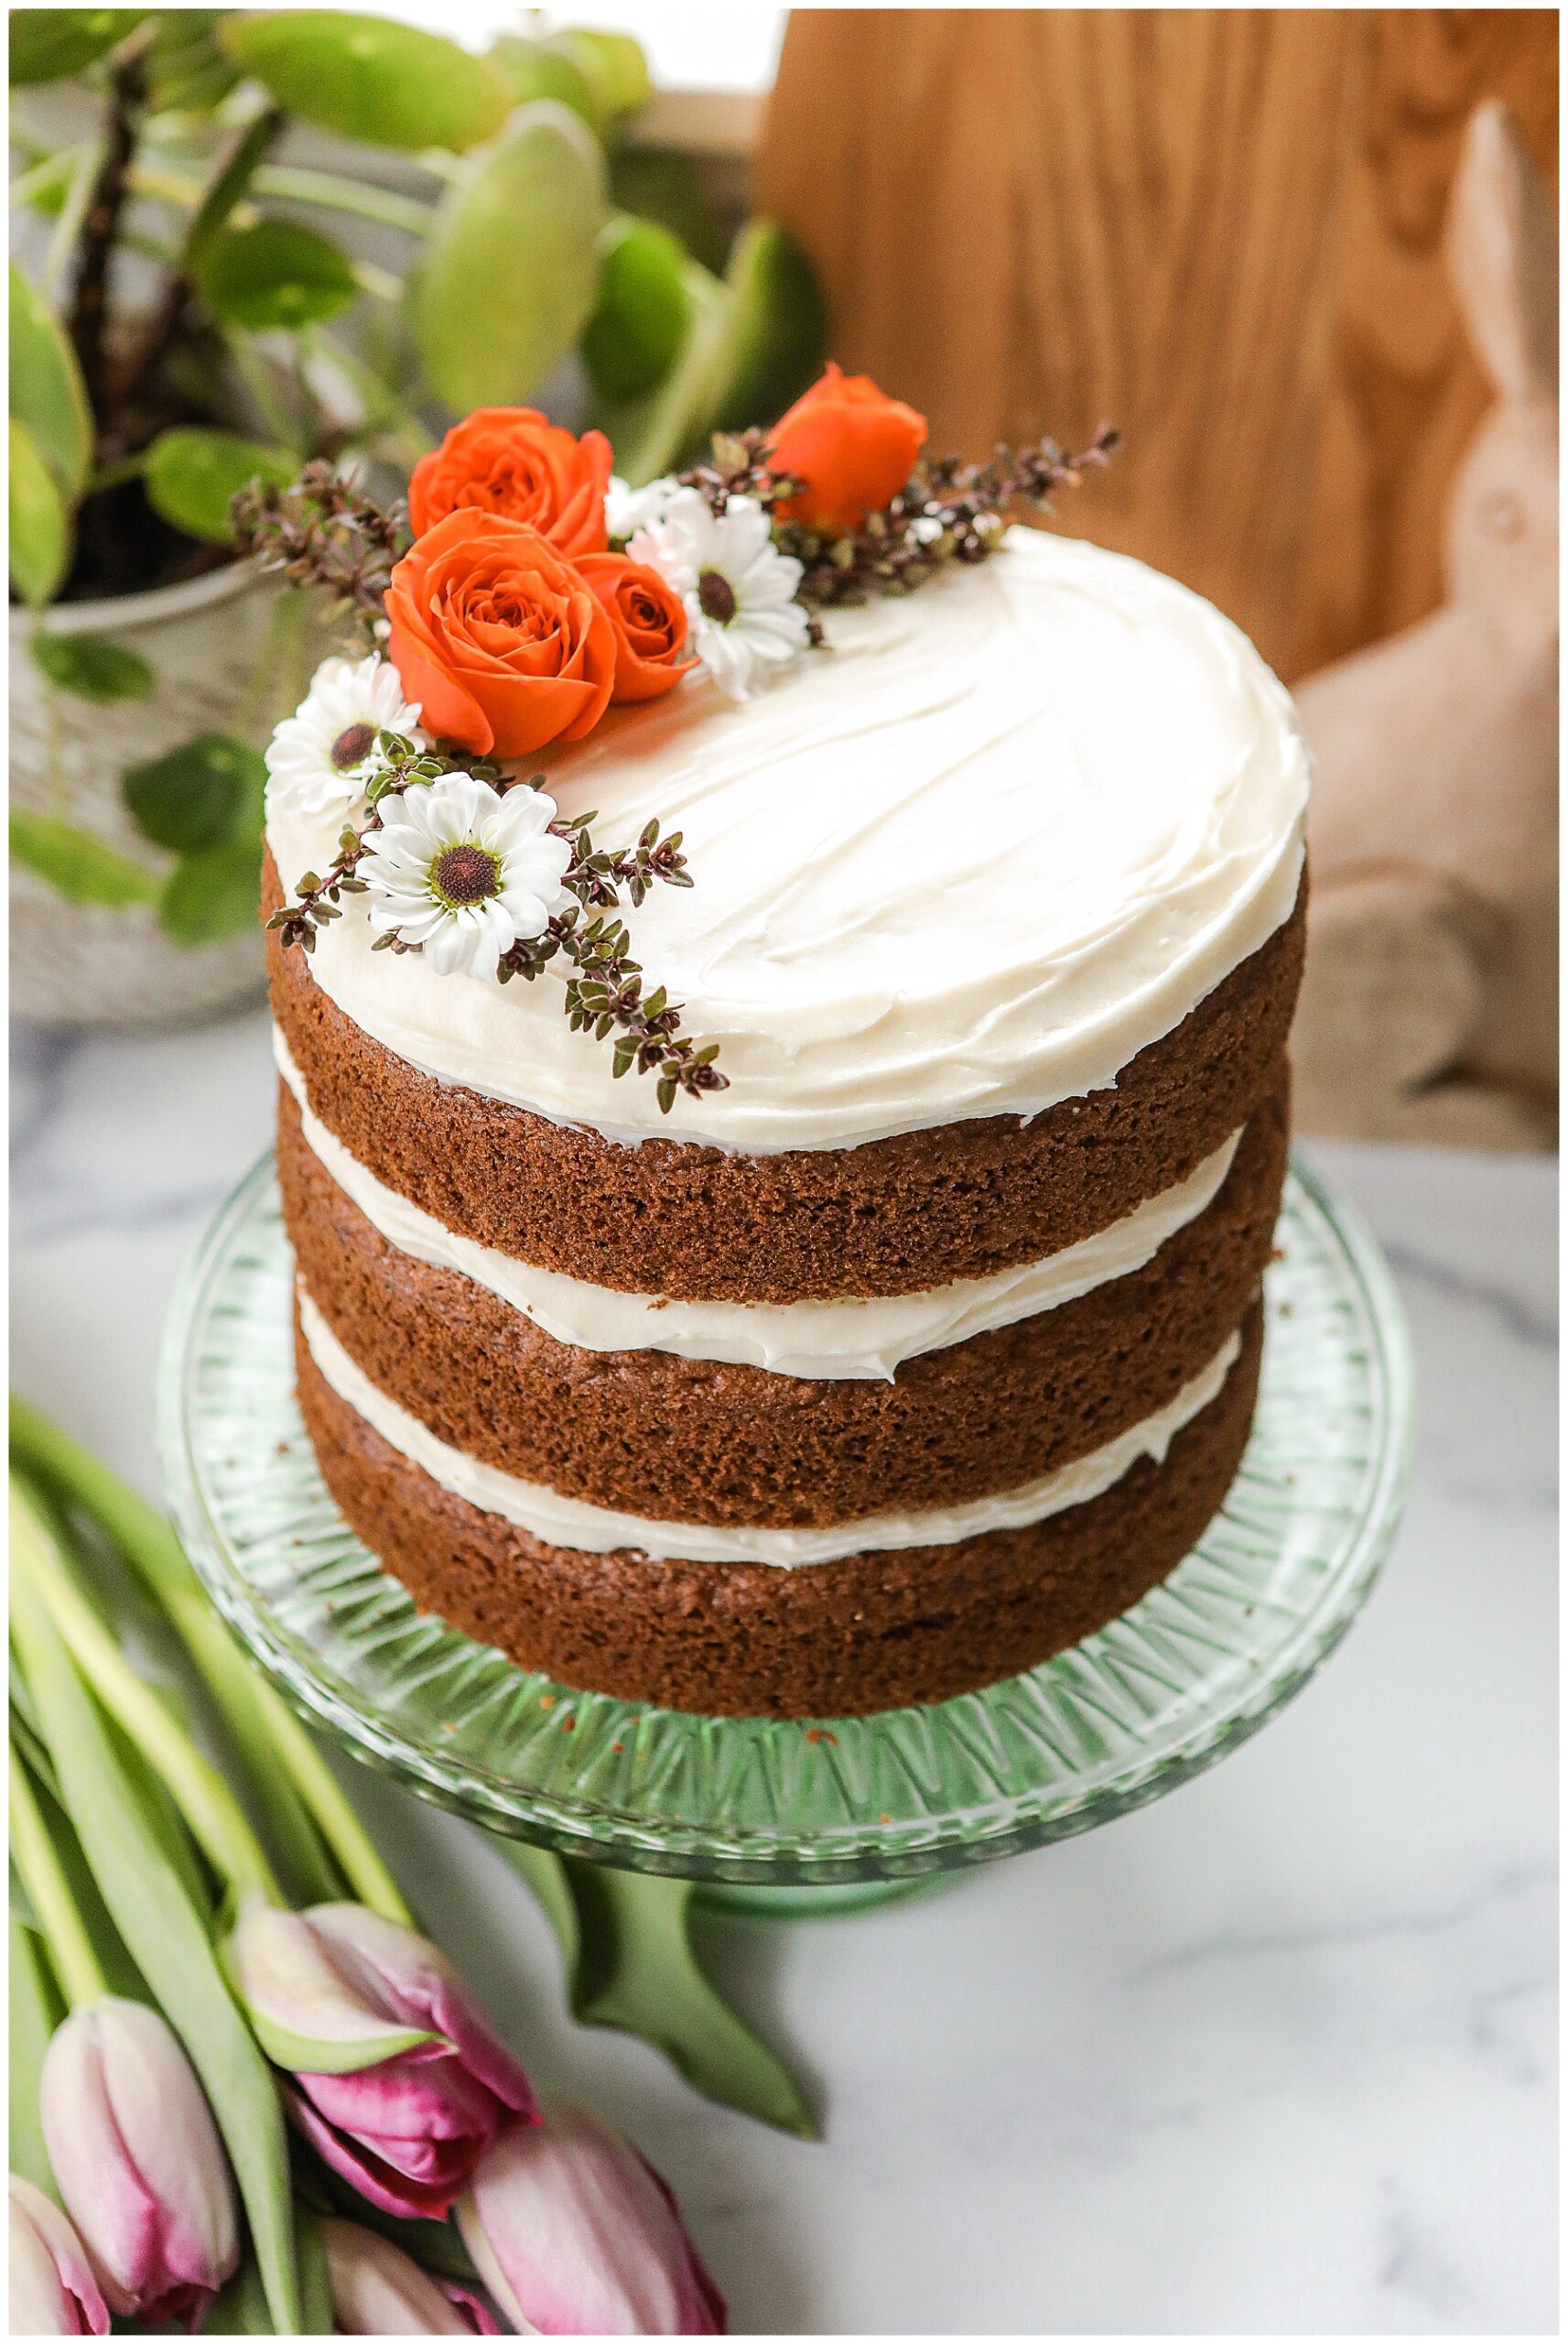 Classic Carrot Cake with cream cheese frosting